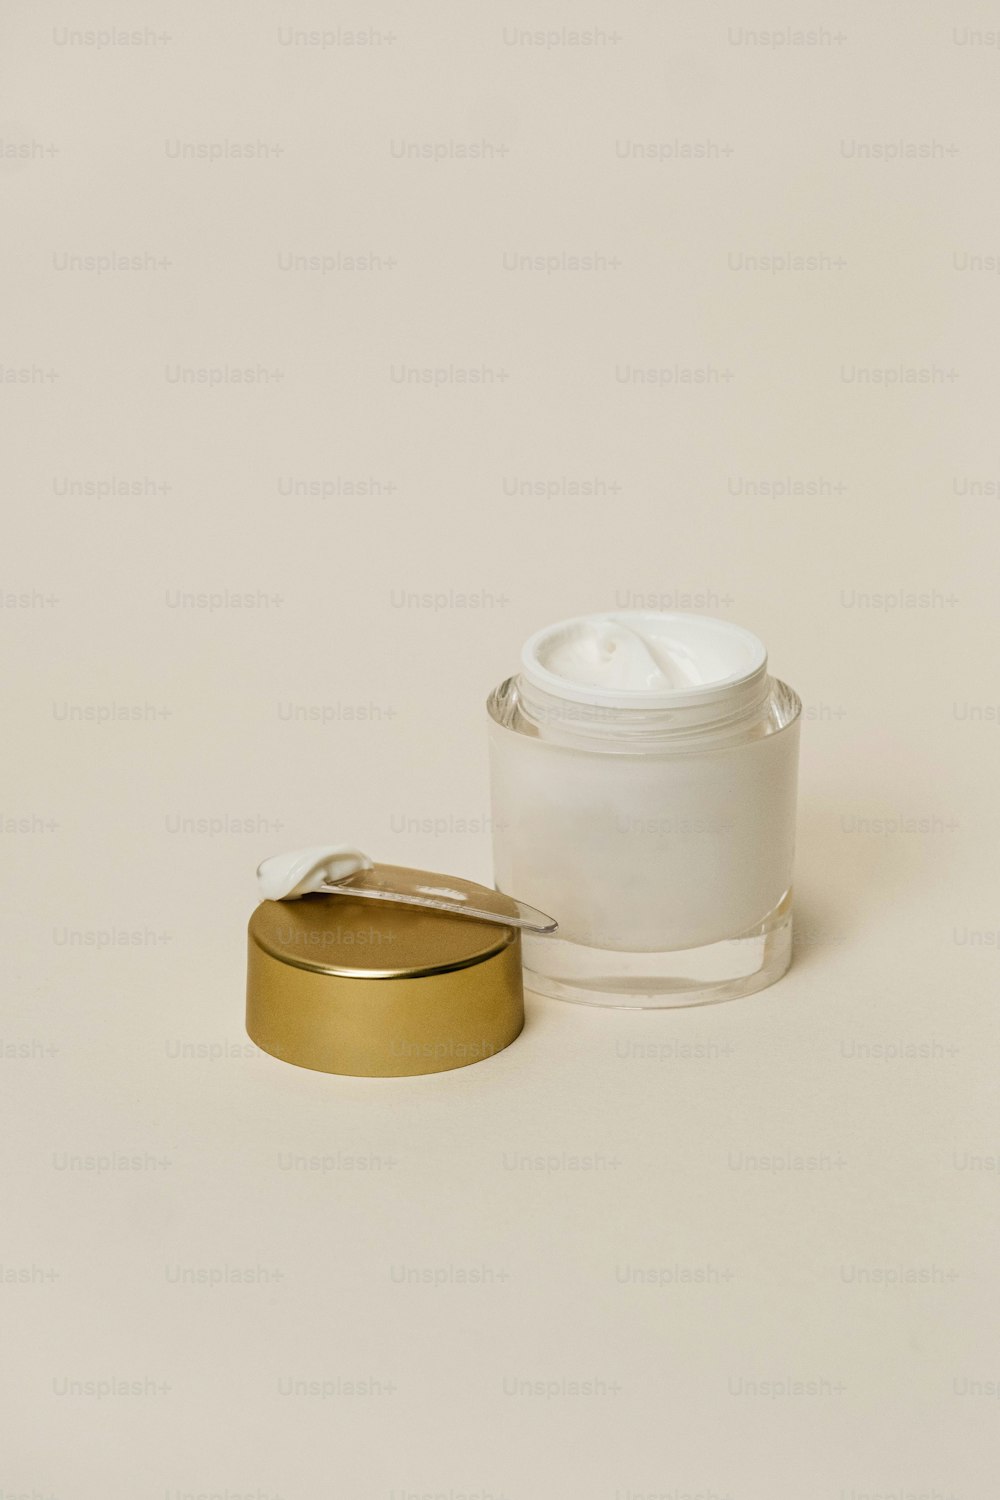 a white container with a gold lid next to a white container